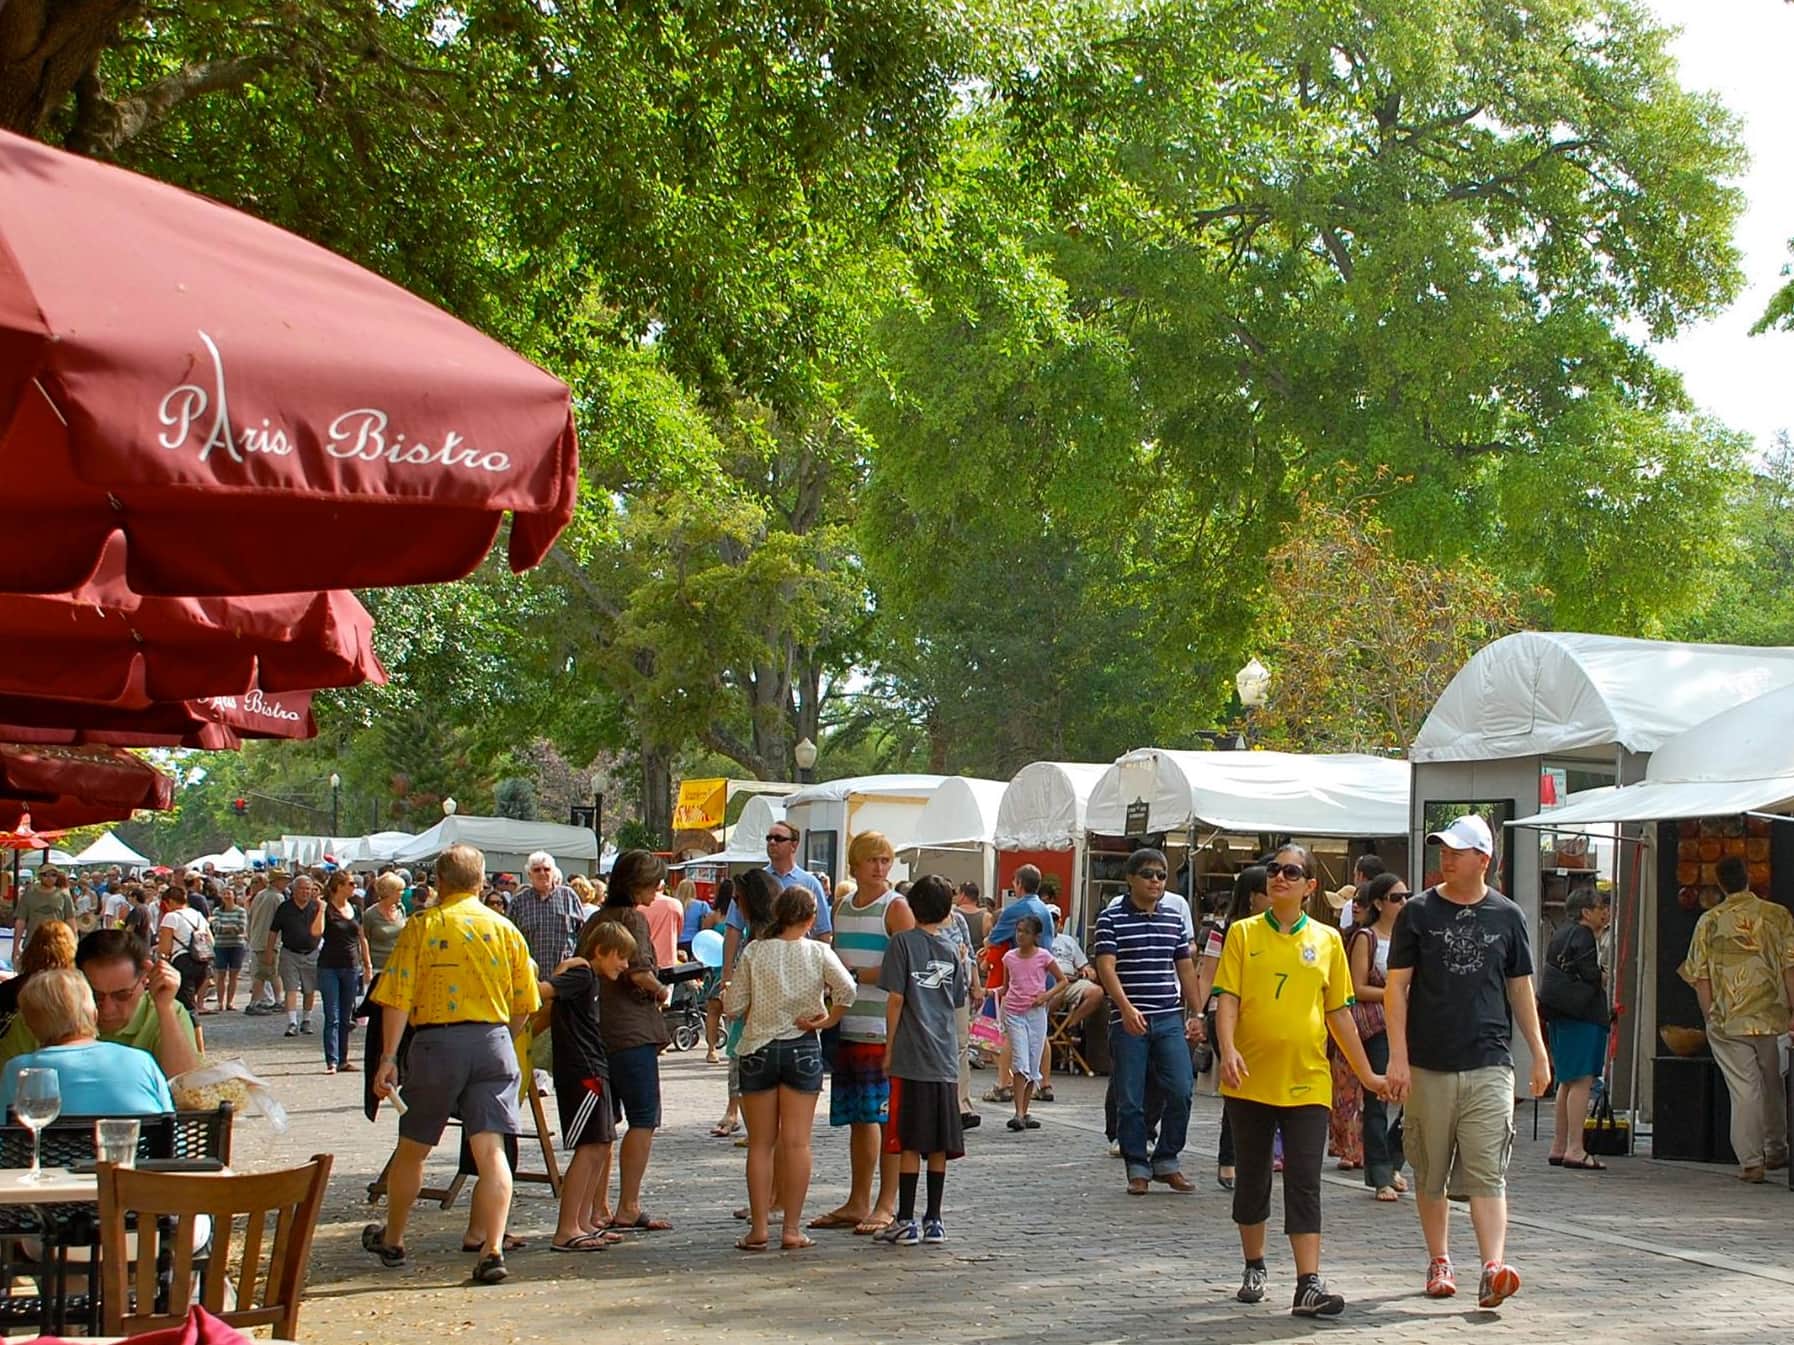 things to do in central florida, winter park art festival, best art festivals, florida art festivals